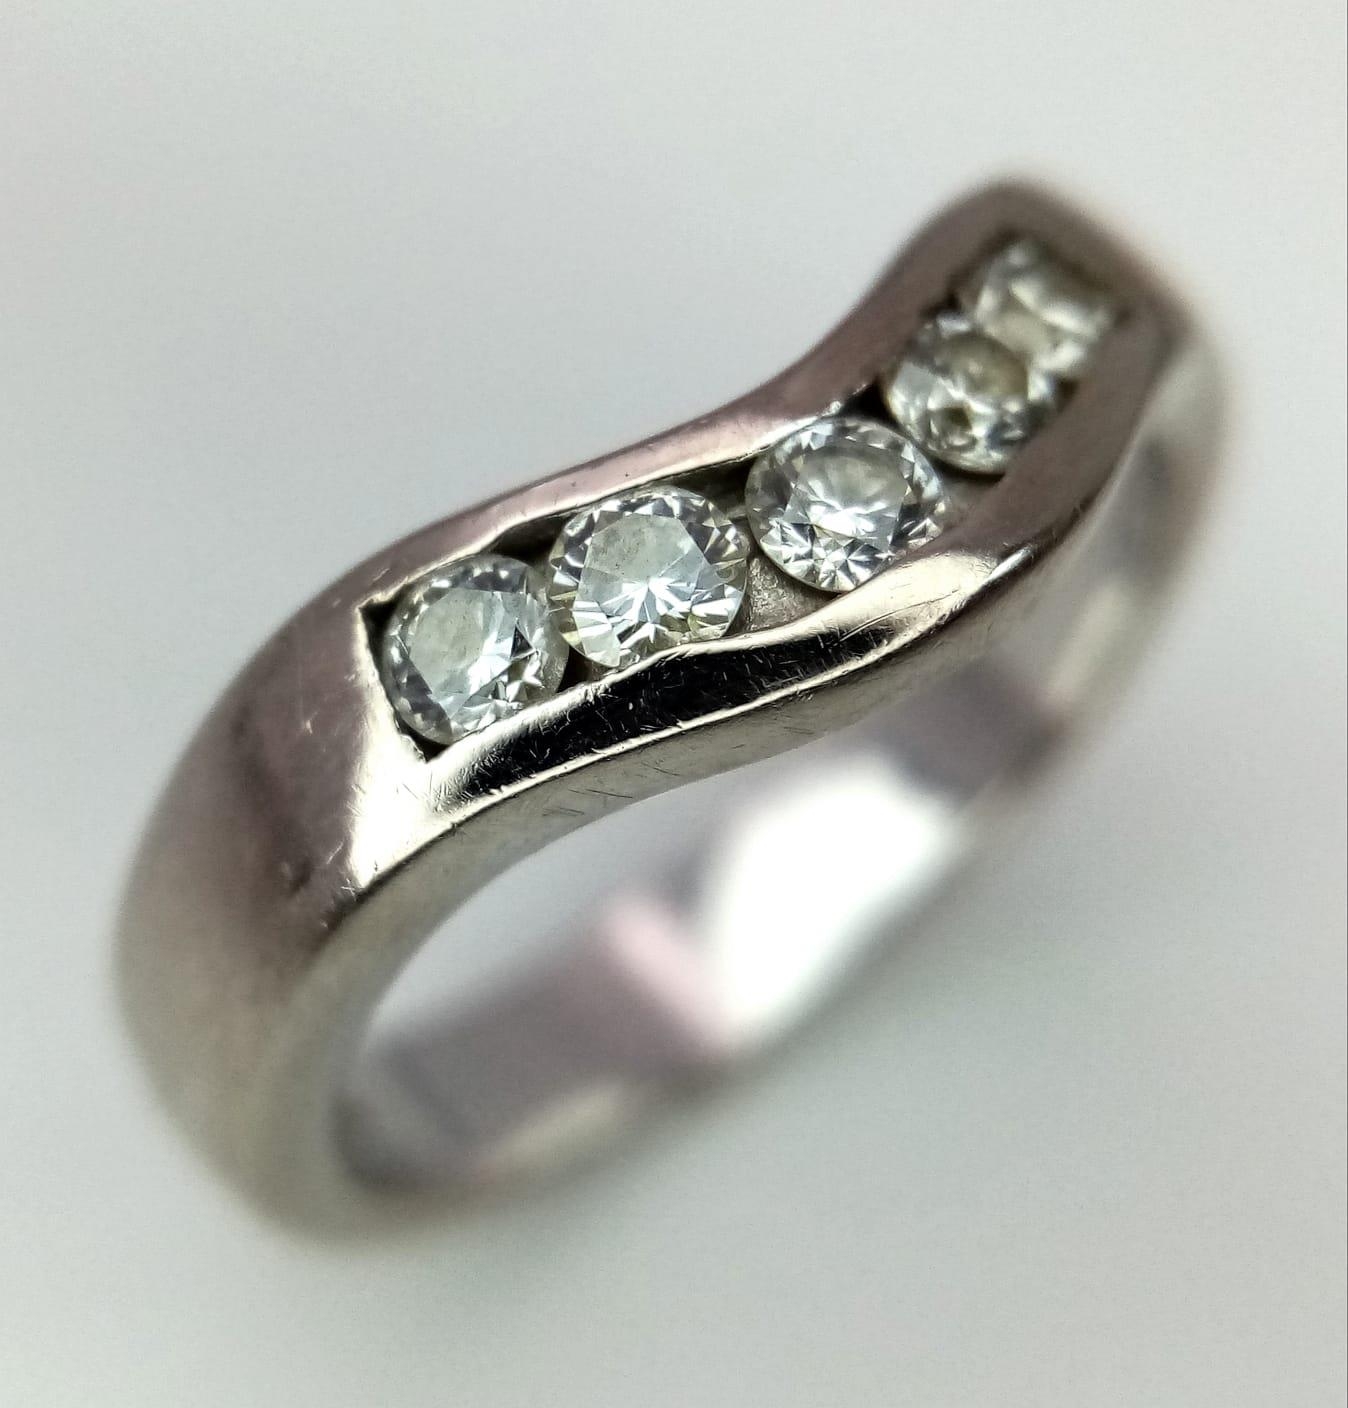 An 18K White Gold Five Stone Diamond Ring. 0.25ctw. Size M. 5.65g total weight. Ref: 14436